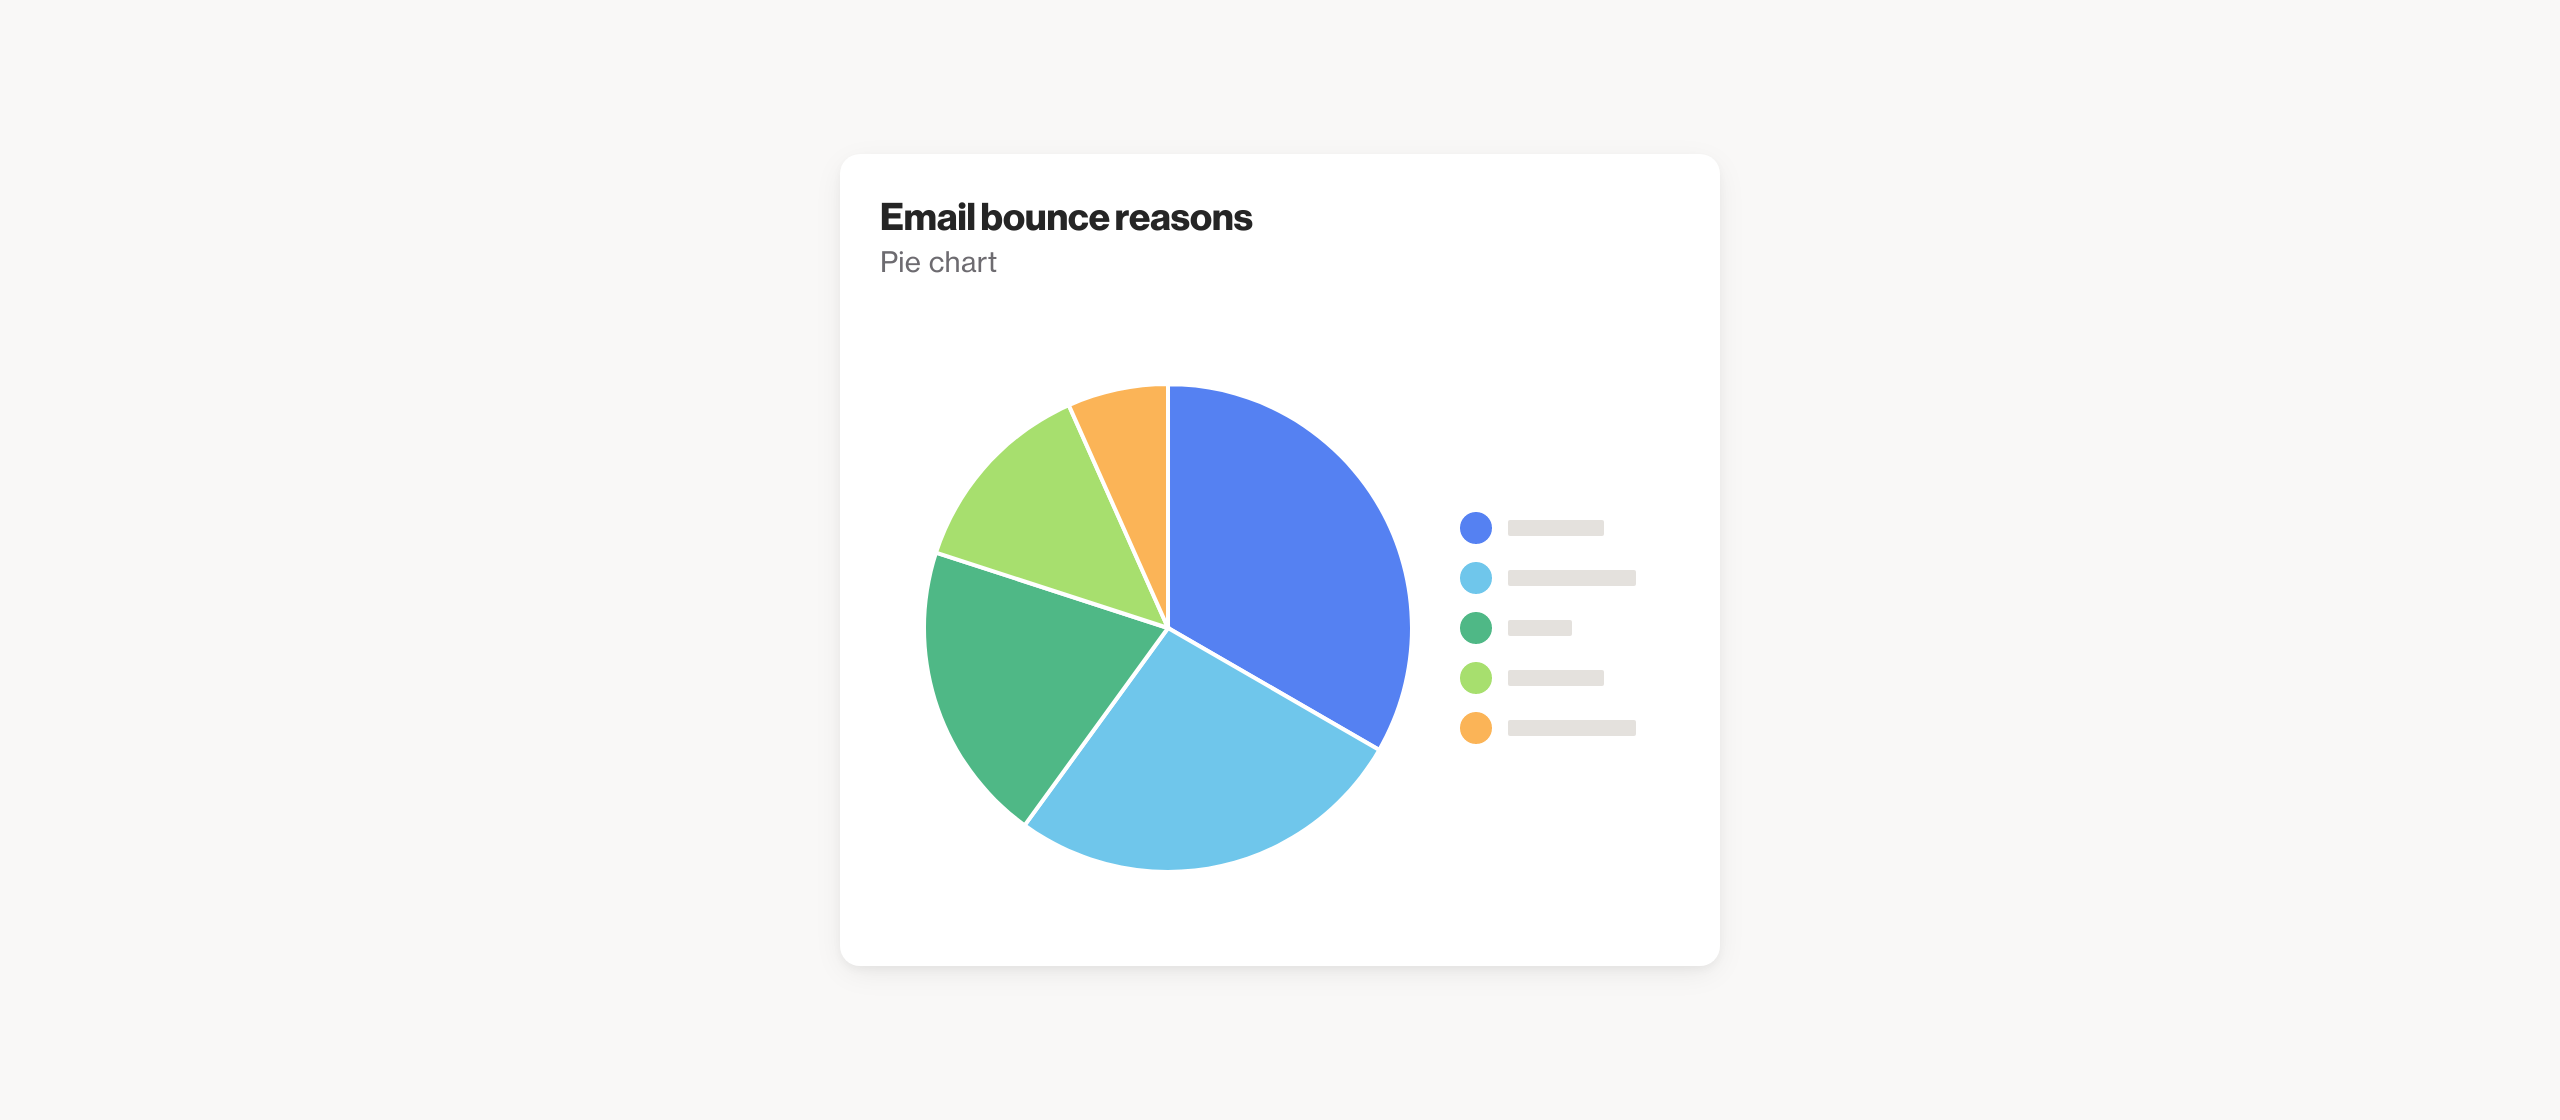 Email bounce reasons